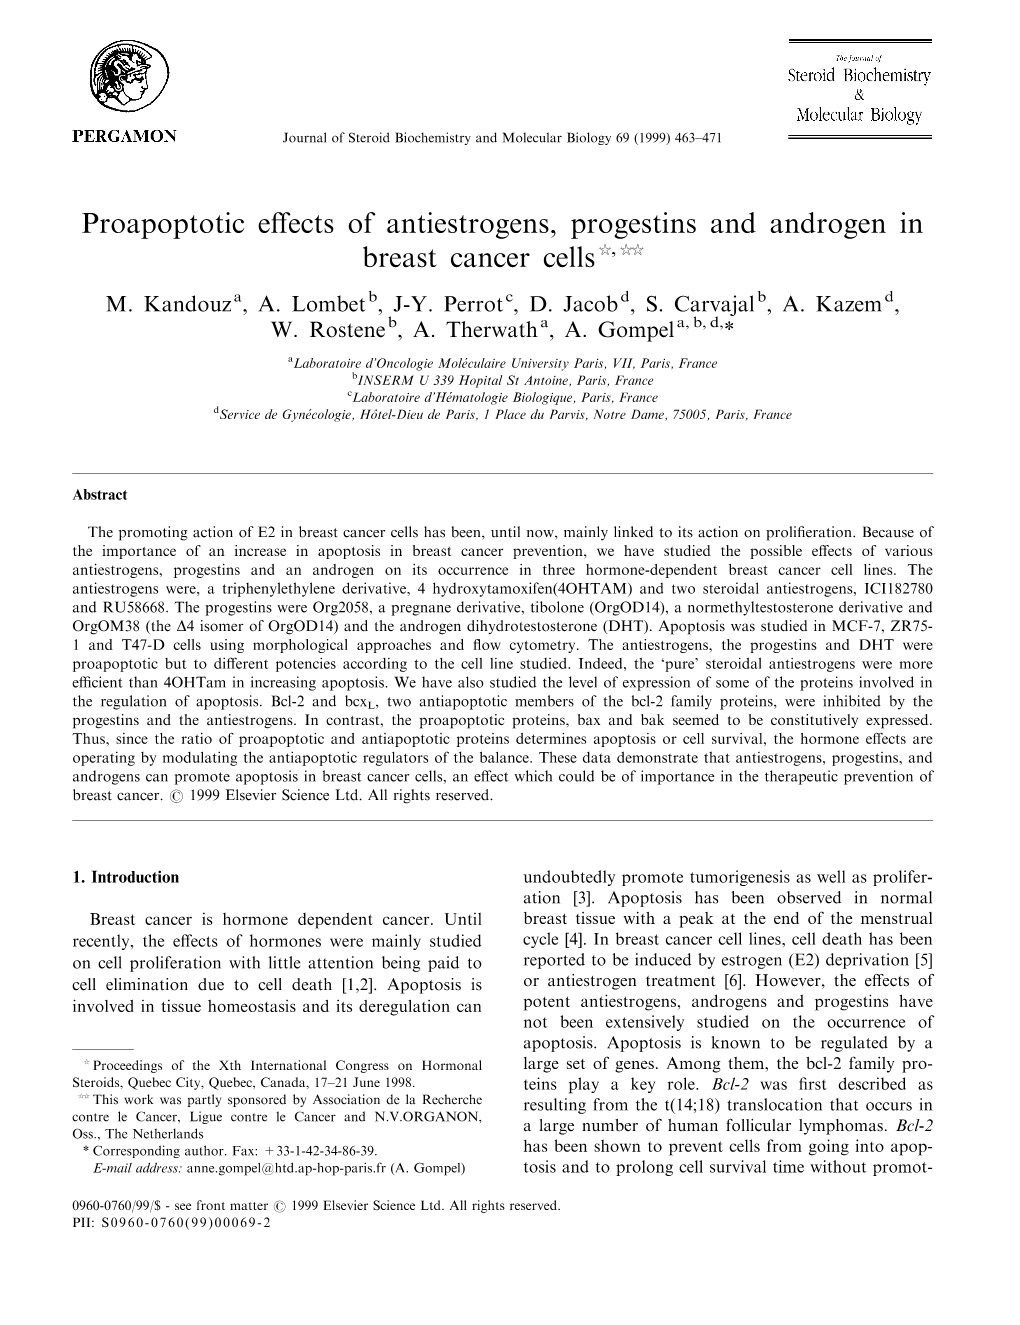 Proapoptotic Effects of Antiestrogens, Progestins and Androgen in Breast